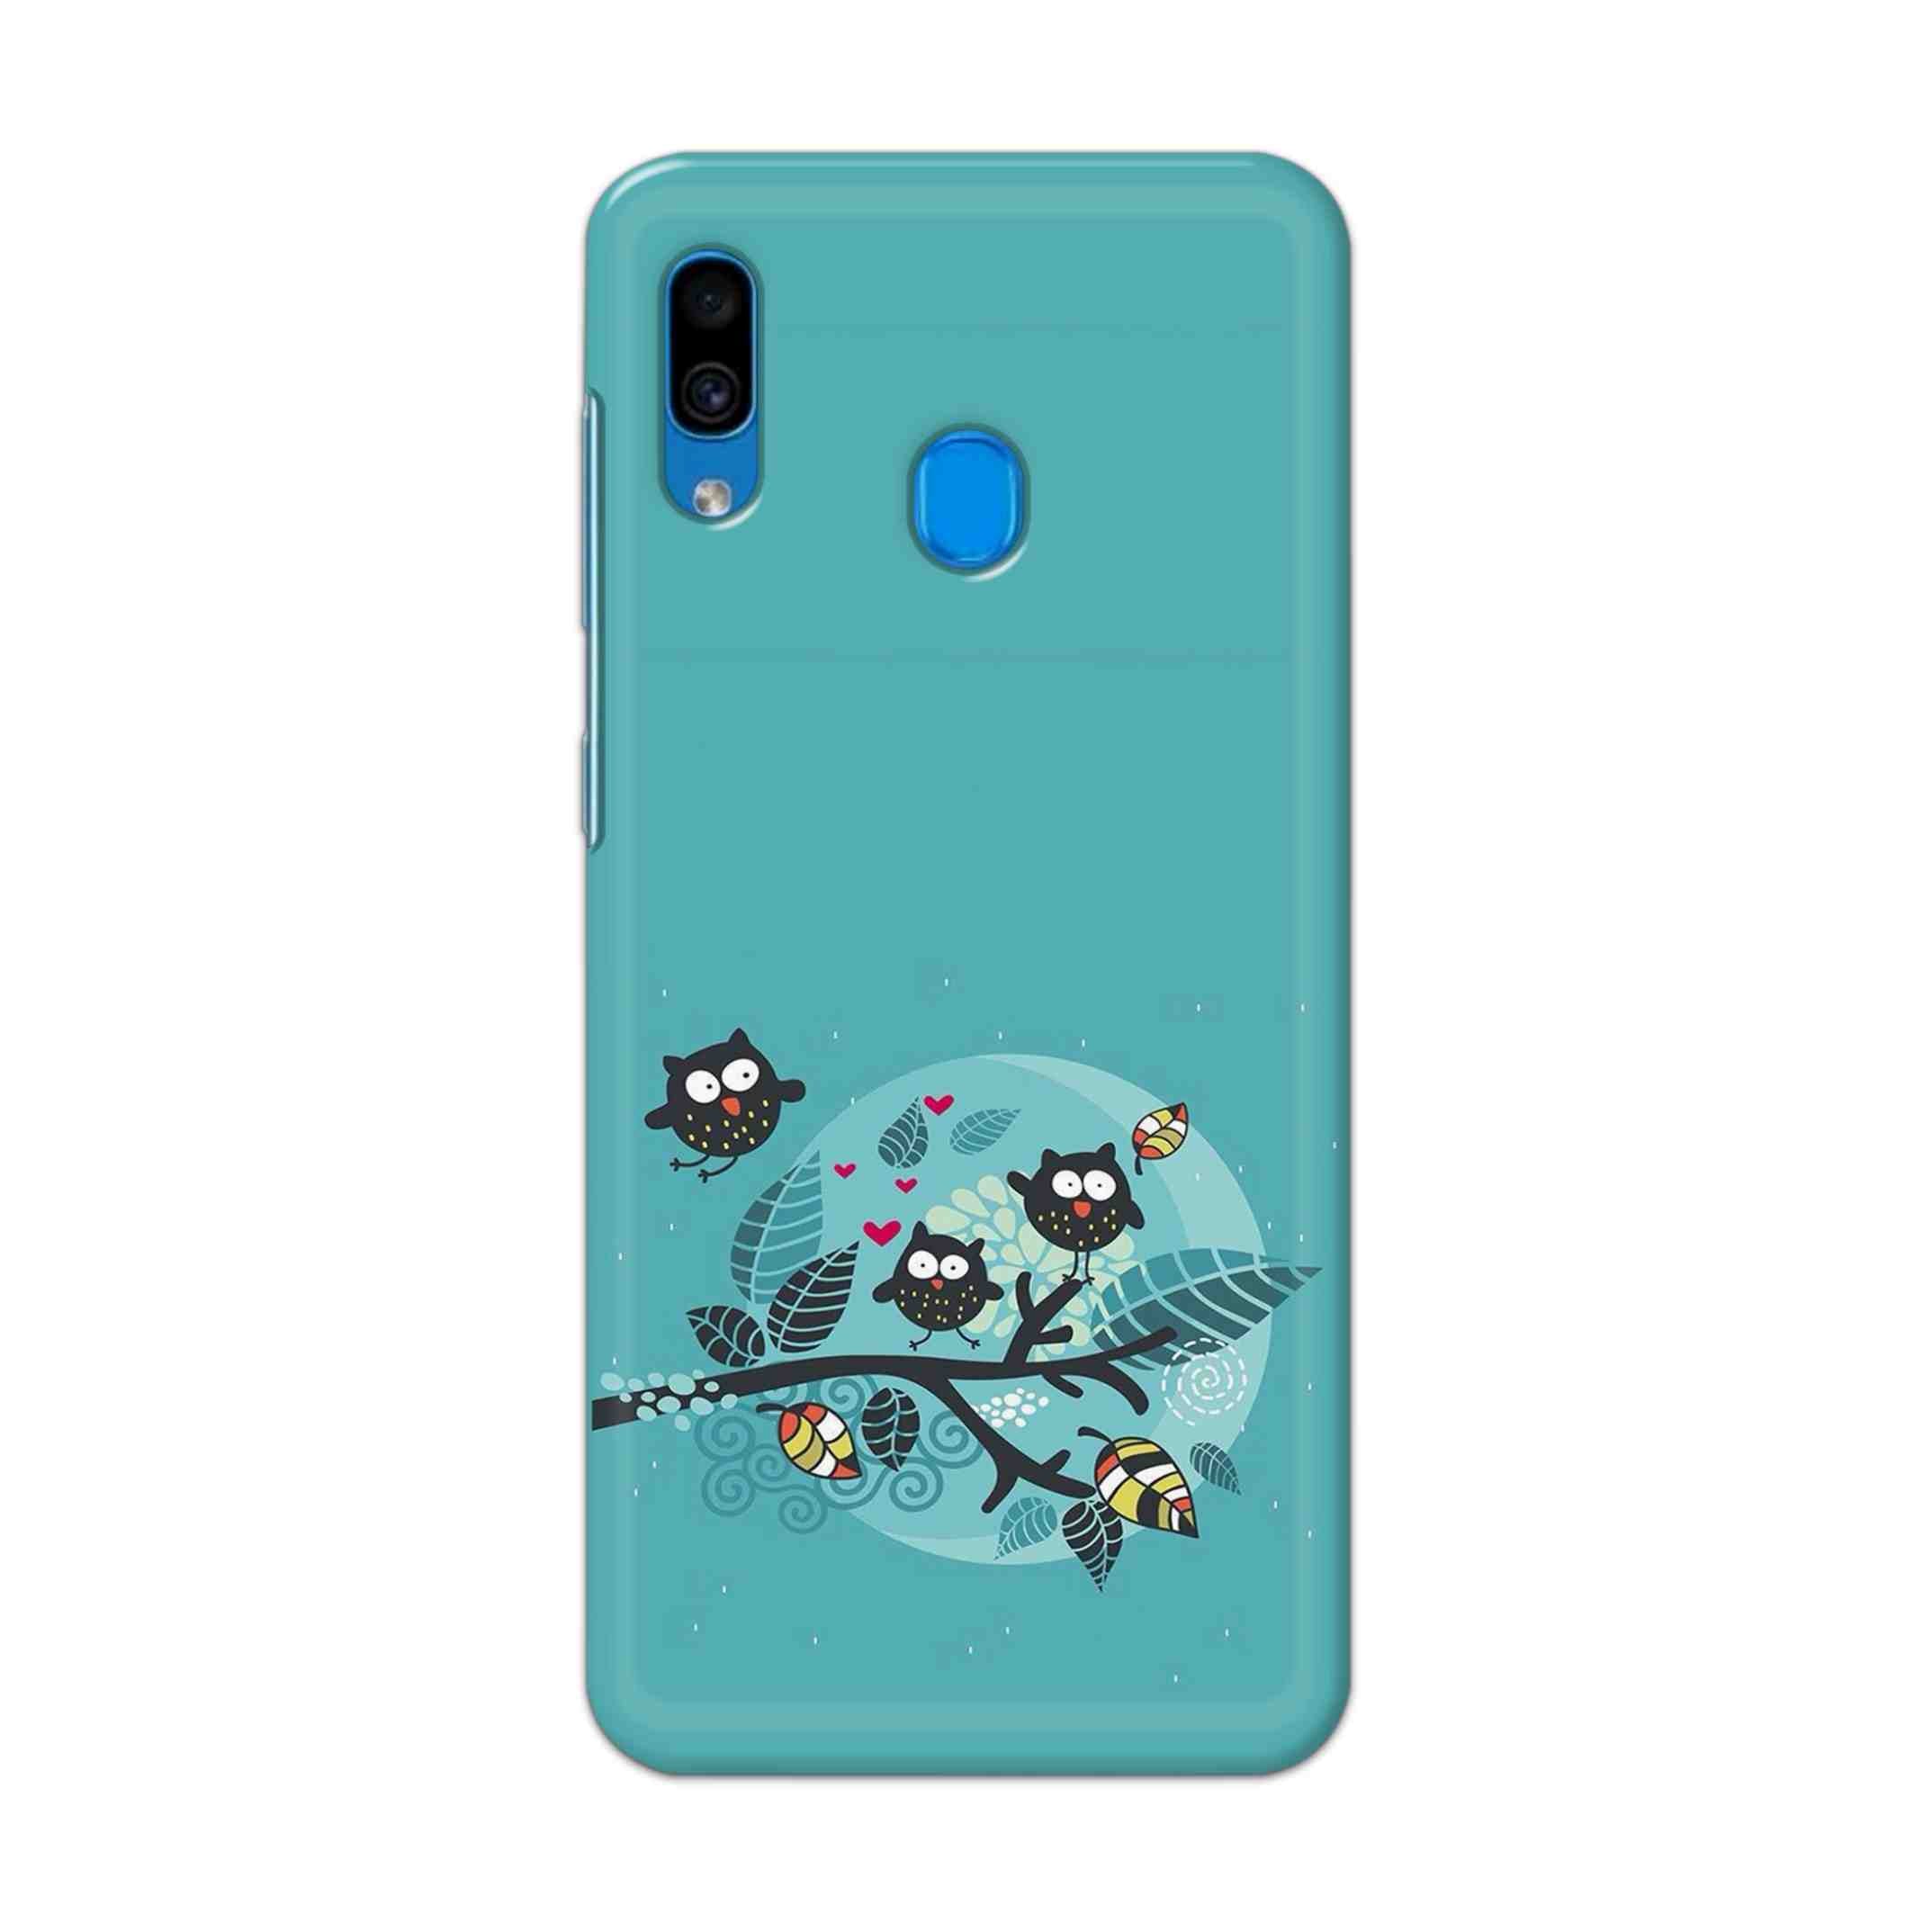 Buy Owl Hard Back Mobile Phone Case Cover For Samsung Galaxy A30 Online